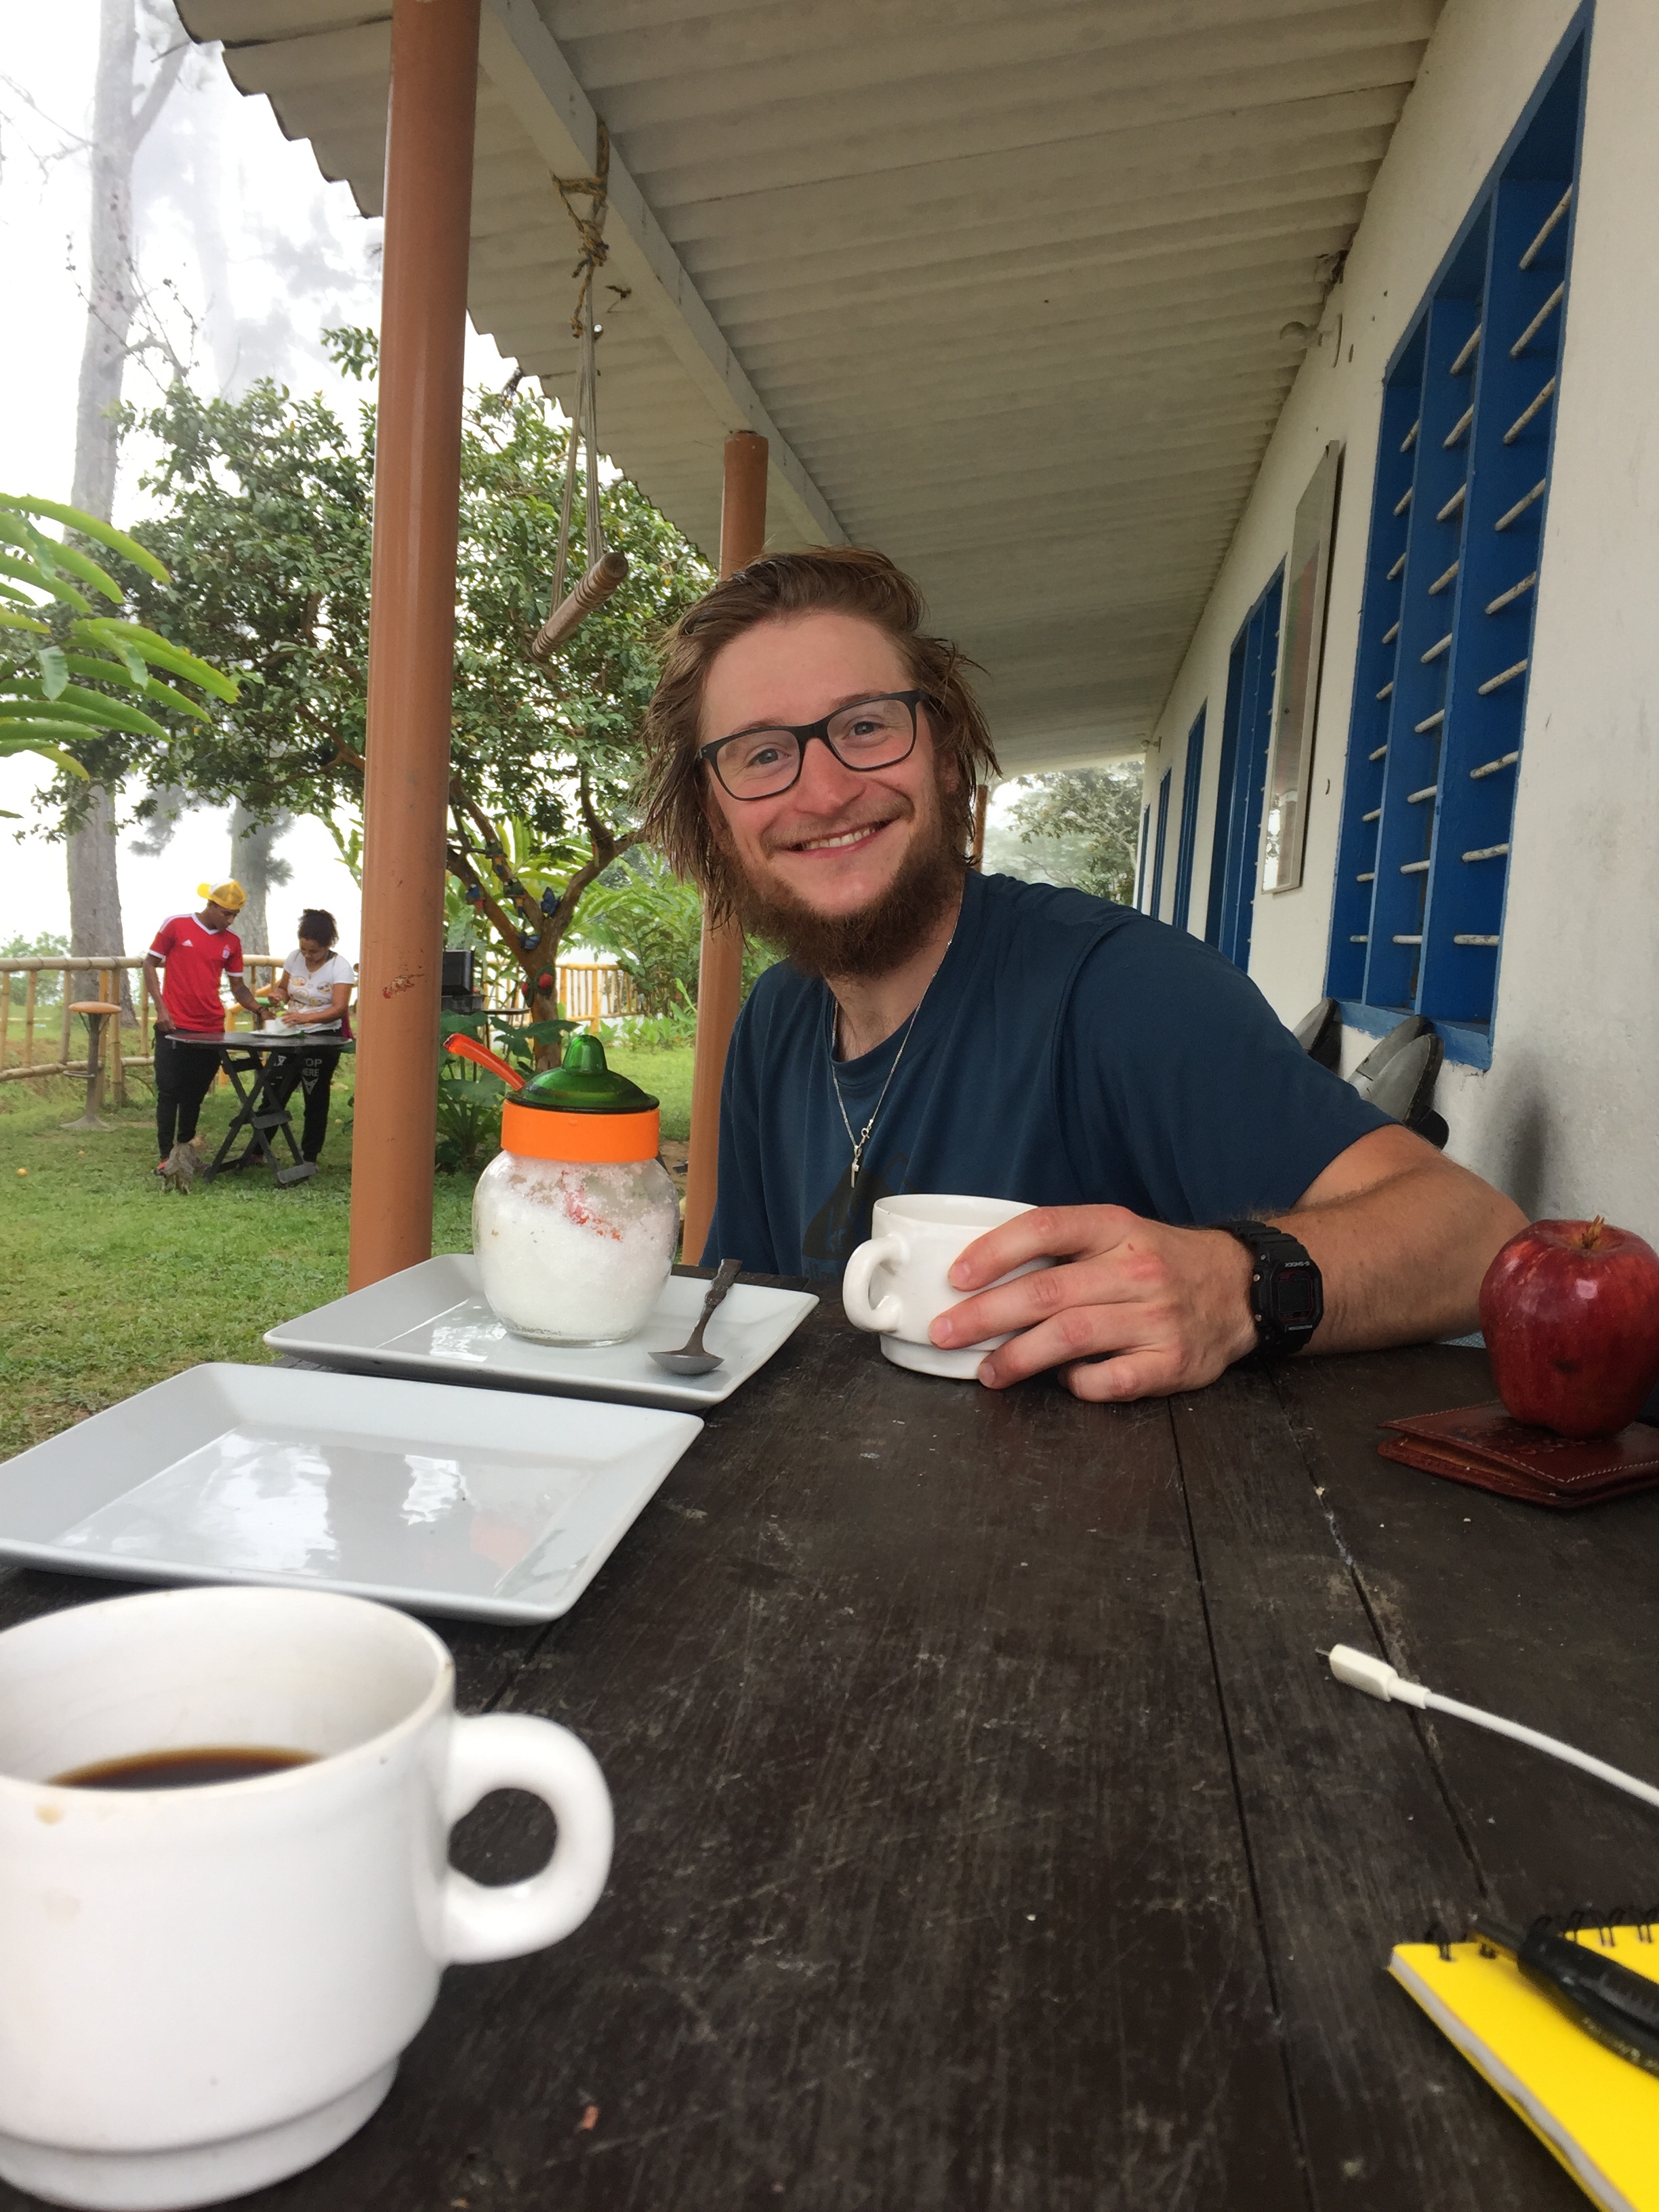   MINCA, COLOMBIA – JULY 26TH, 2017: My friend Bertie and I drink coffee at Hostel Los Pinos at the end of a 5 mile trek into the mountains. He was just one of the many charming people I met in Minca . 